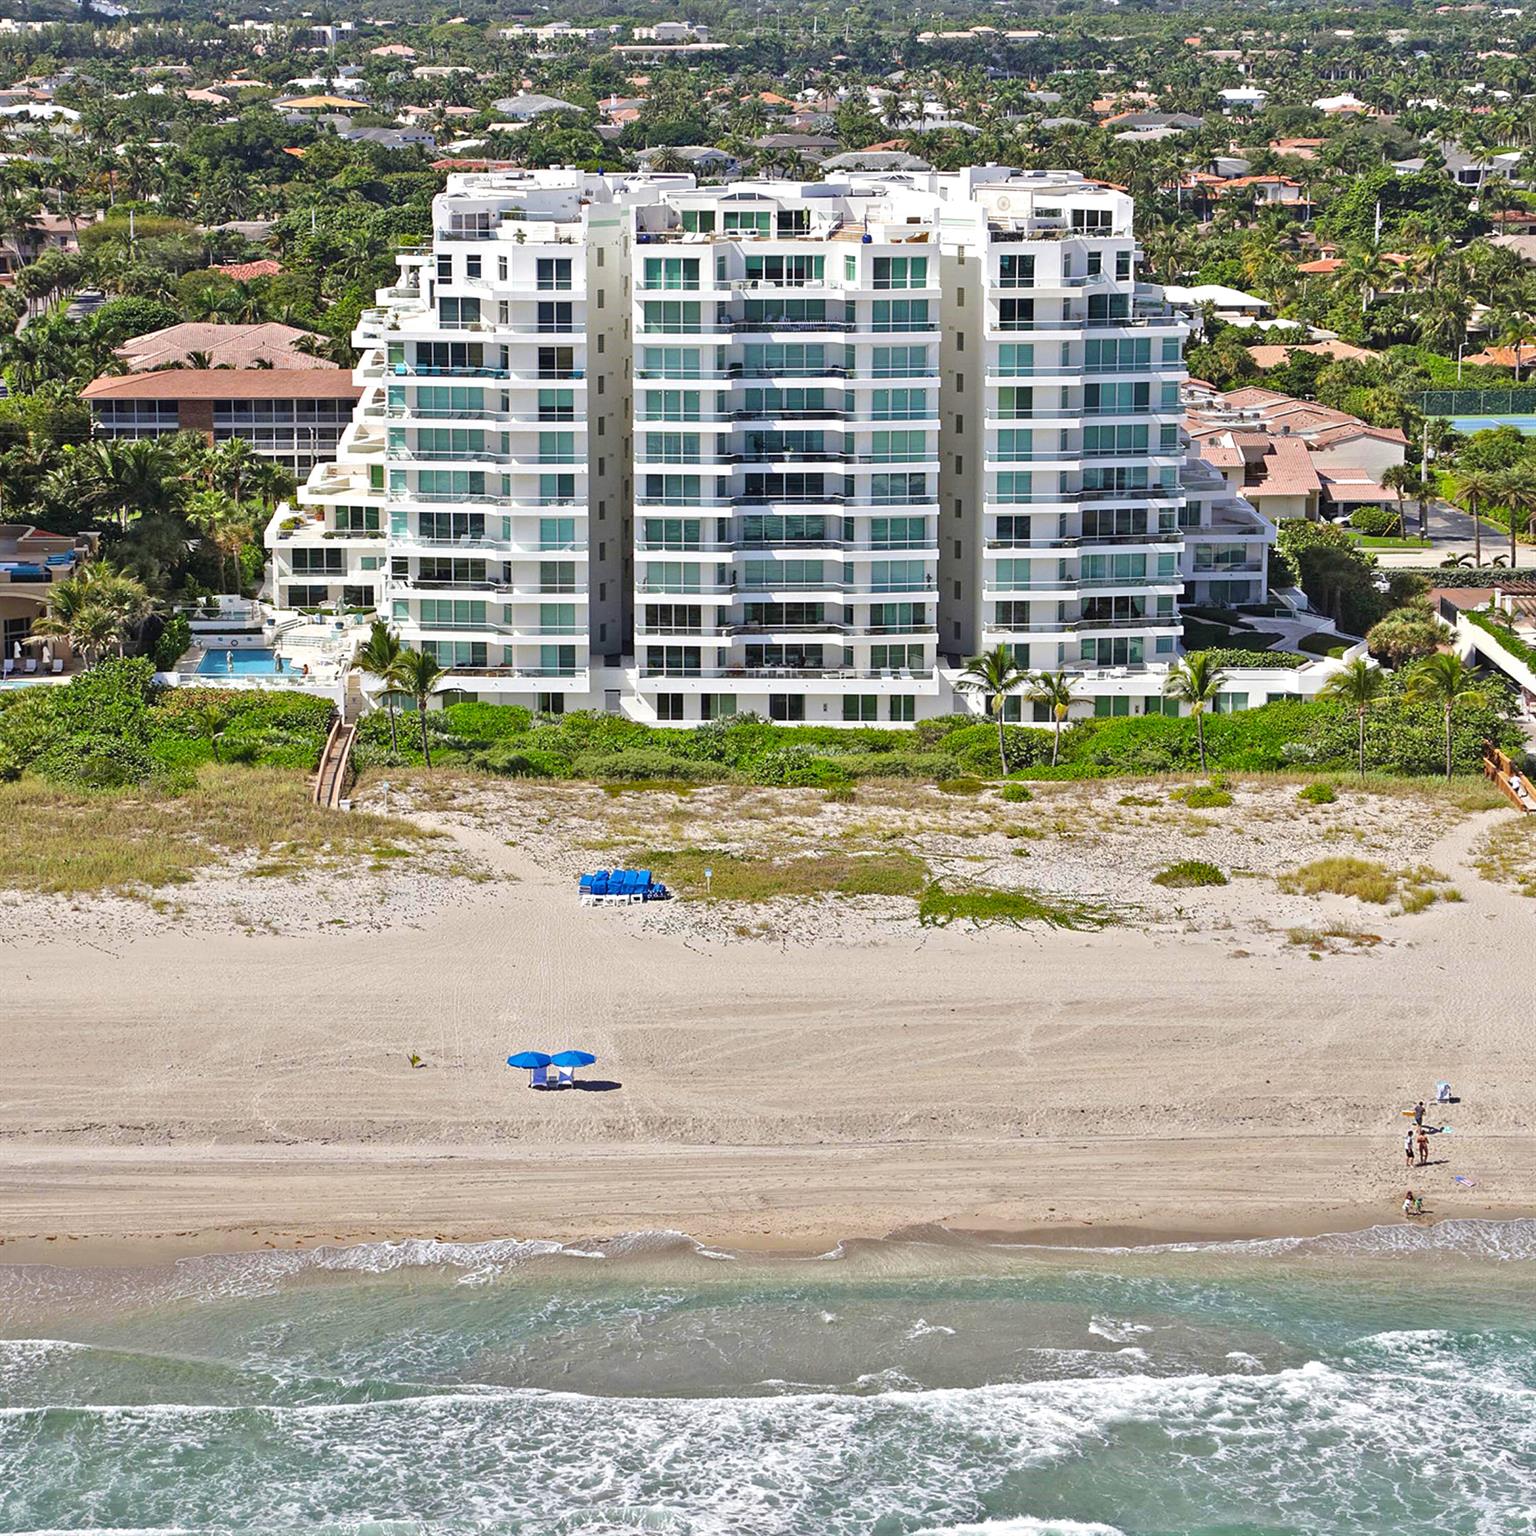 Magnificent Southeast Corner Oceanfront Residence with a Wrap-Around Terrace is now available at the prestigious Aragon sited Directly on the Sand in Boca Raton.  Boasting 3 spacious Bedrooms En-Suite, Great Room, Formal Dining Room, an open Kitchen and adjoining Family Room and a Private Elevator Entry into your Residence, this Spectacular Residence encompasses over 3,700 sq. ft of living space. The Gracious Principal Bedroom Suite features a large Walk-In Closet, ample Linen storage, dual sinks, two separate water closets, separate tub and shower, and Spacious Outdoor Terraces envelope this Residence with sweeping Ocean and Intracoastal Views.  This Exceptional Oceanfront condominium lives like an Estate Home on the Sand.  See MORE for Add'l Information! Magnificent Southeast Corner Oceanfront Residence with a Wrap-Around Terrace is now available at the prestigious Aragon sited Directly on the Sand in Boca Raton.  Boasting 3 spacious Bedrooms En-Suite, Great Room, Formal Dining Room, an open Kitchen and adjoining Family Room and a Private Elevator Entry into your Residence, this Spectacular Residence encompasses over 3,700 sq. ft of living space. The Gracious Principal Bedroom Suite features a large Walk-In Closet, ample Linen storage, dual sinks, two separate water closets, separate tub and shower, and Spacious Private Outdoor Terraces envelope this Residence with sweeping Ocean and Intracoastal Views.  This Exceptional Oceanfront condominium lives like an Estate Home on the Sand.  
Aragon is a Full-Service Luxury Oceanfront condominium offering its Residents World-Class Amenities and Services including 24/7 Security, Concierge Services, a State-of-the-Art Fitness center, a Resort-Style Pool and much more!